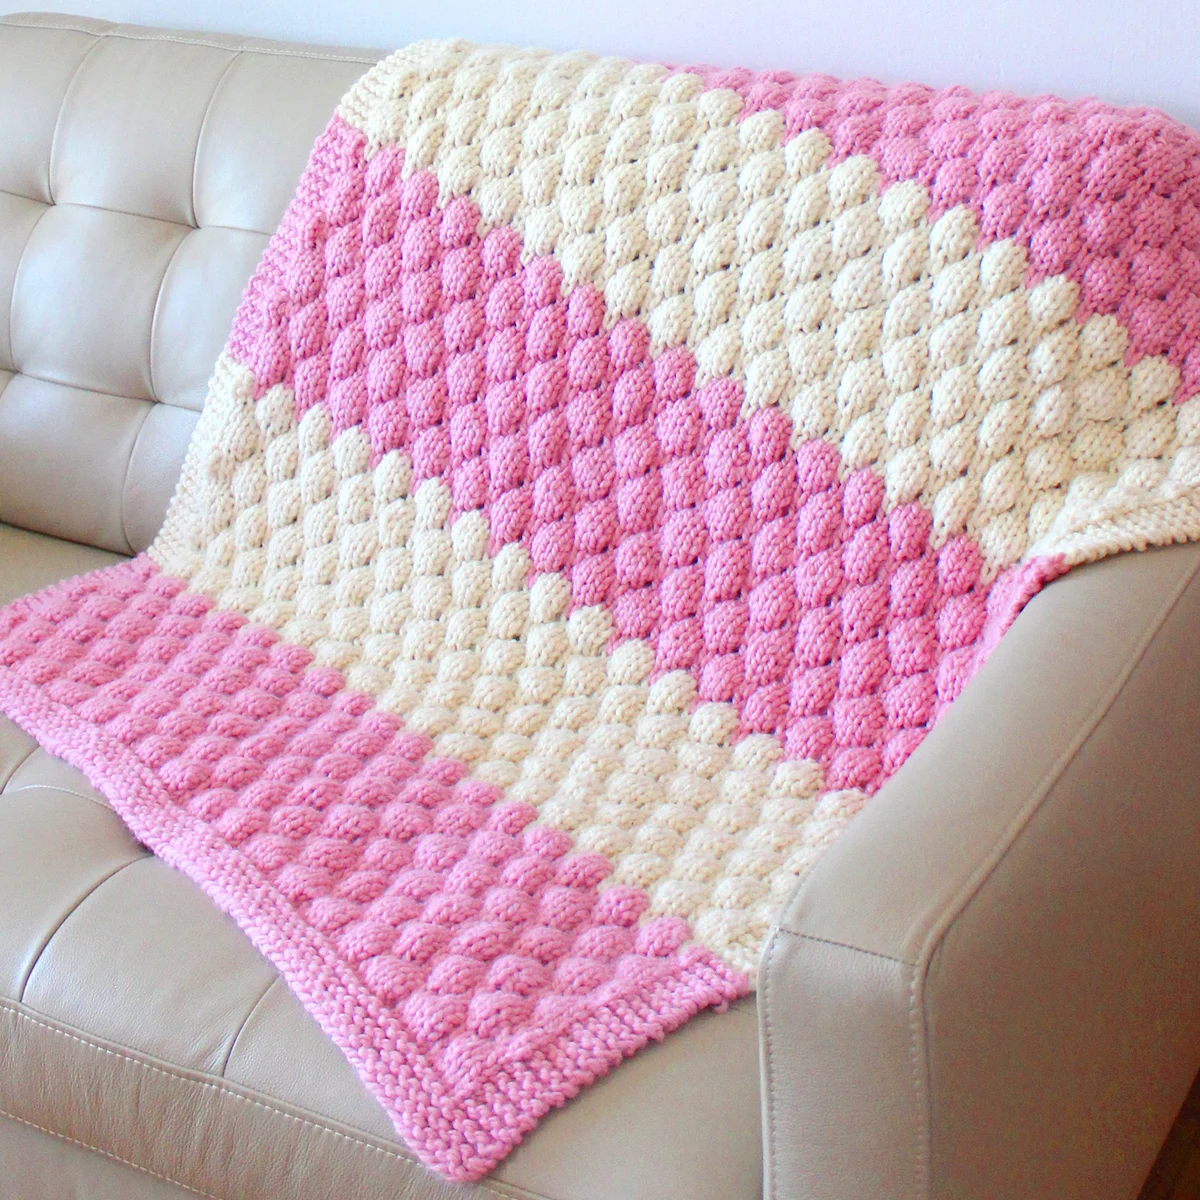 Bubble Stitch Blanket knitted with pink and white yarn colors on a couch.